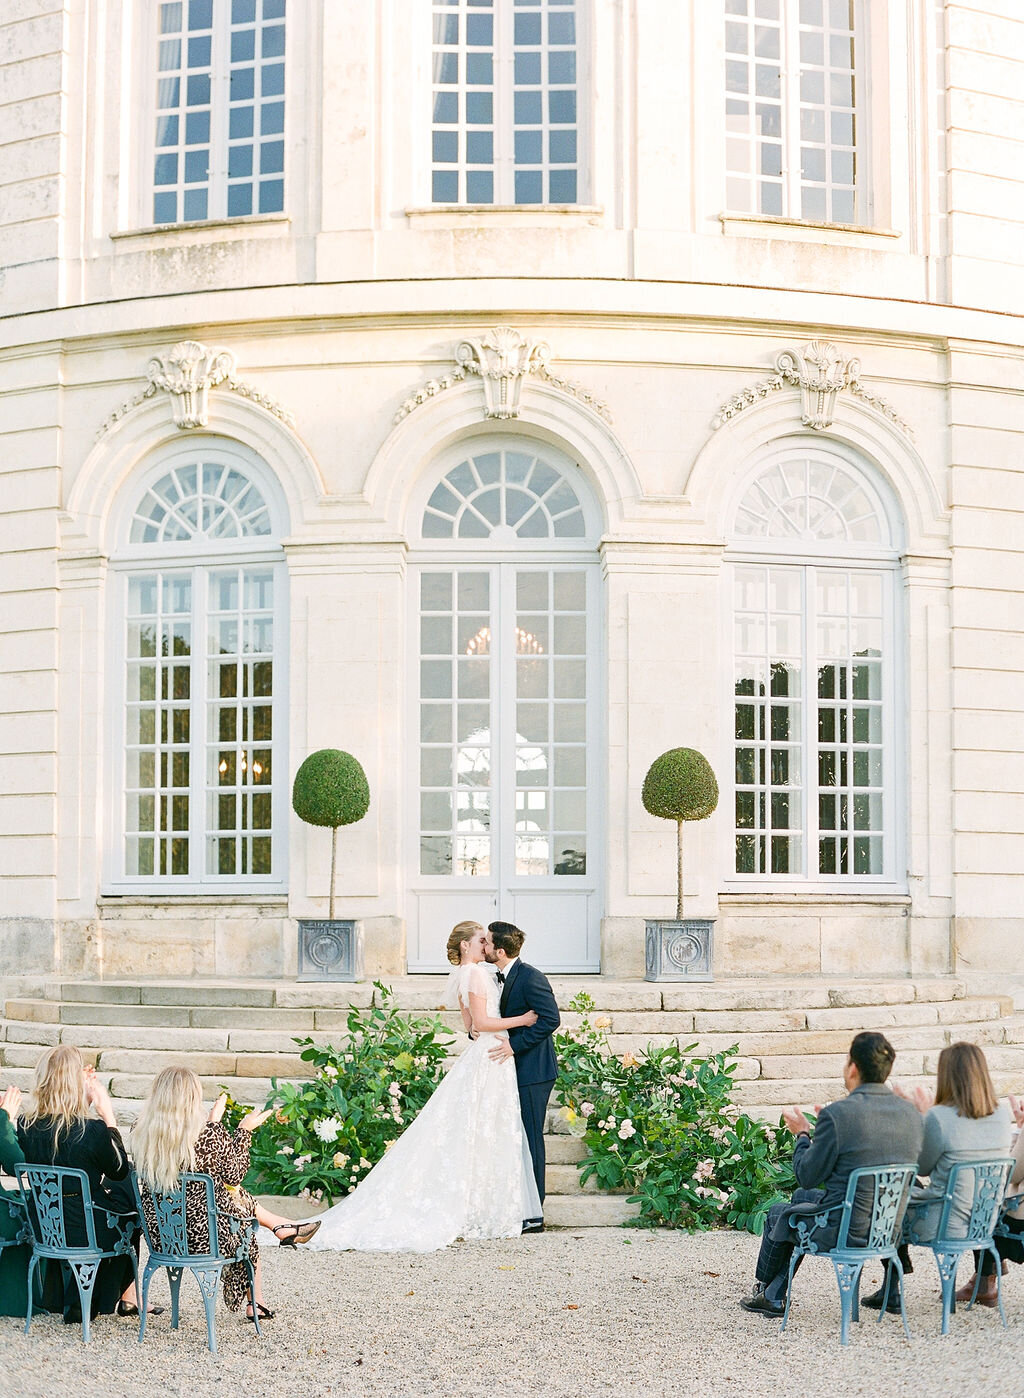 Molly-Carr-Photography-Chateau-Grand-Luce-Wedding-14